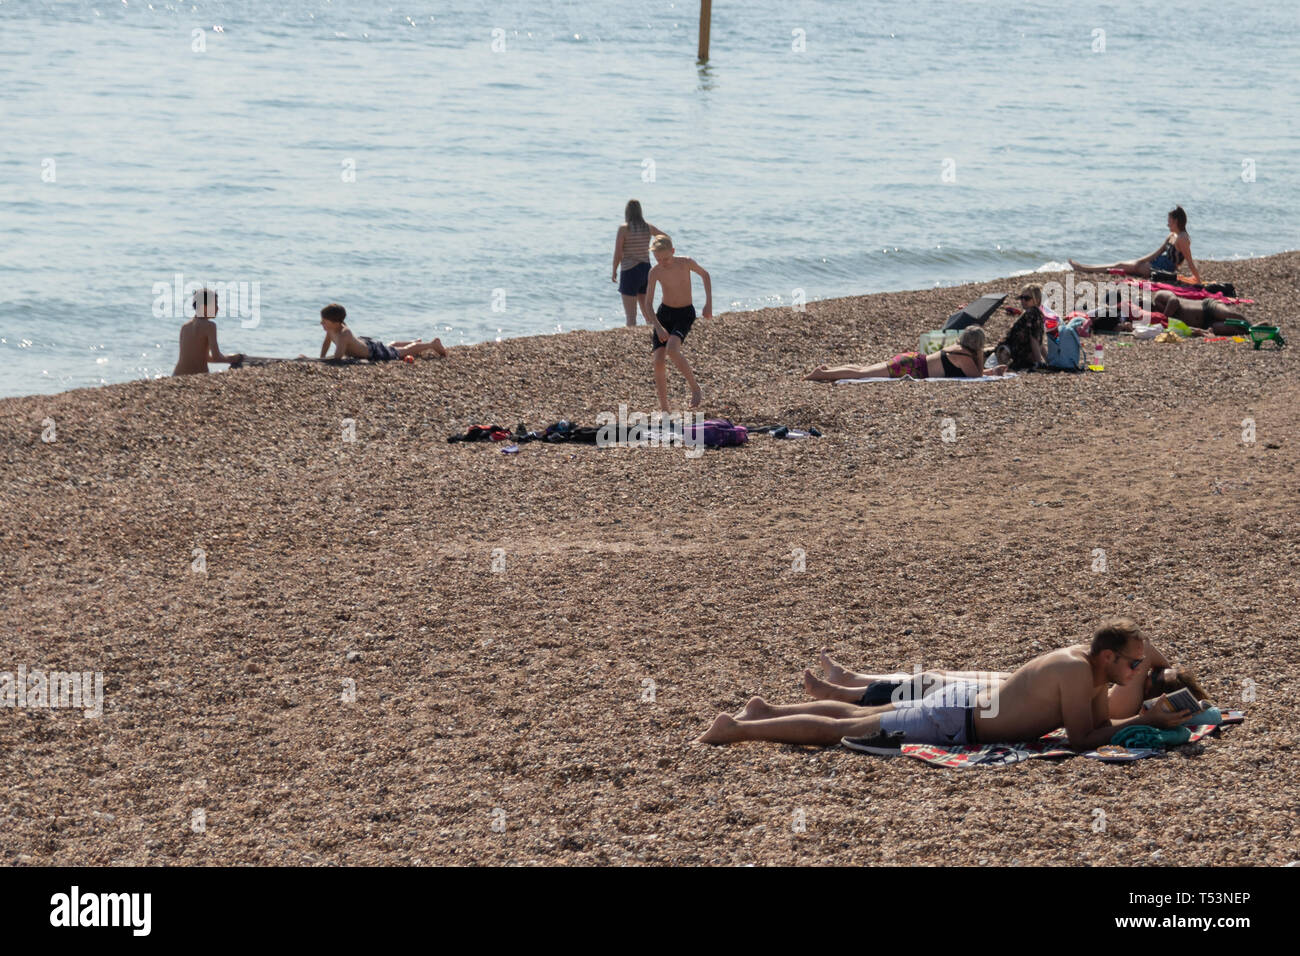 Crowds enjoying the sunshine on a pebble beach in the UK Stock Photo